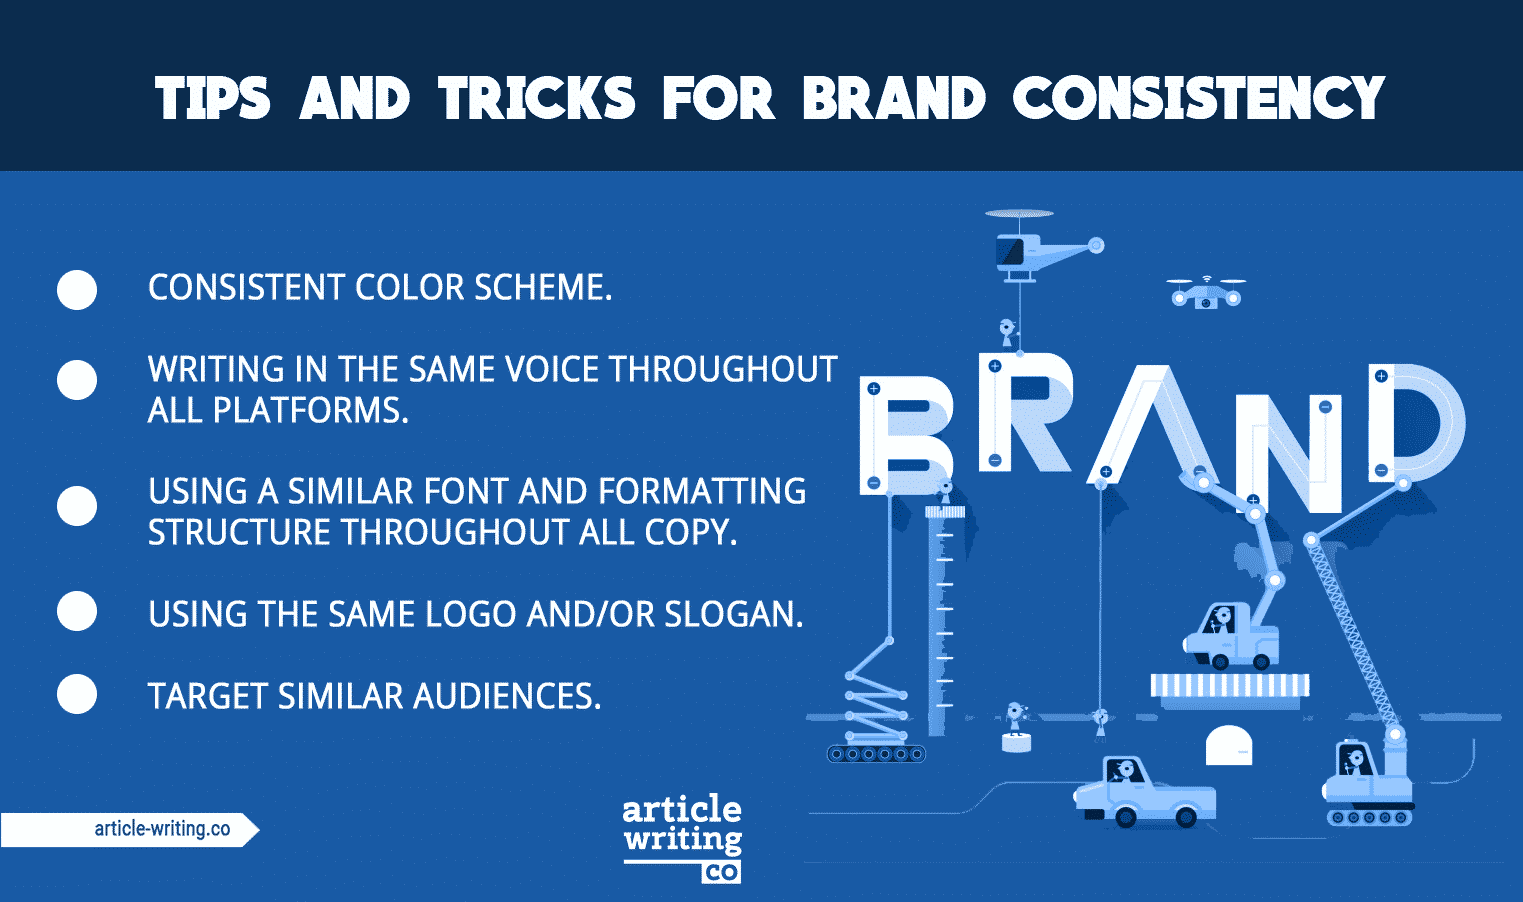 There are numerous tips and tricks one can use for brand consistency.